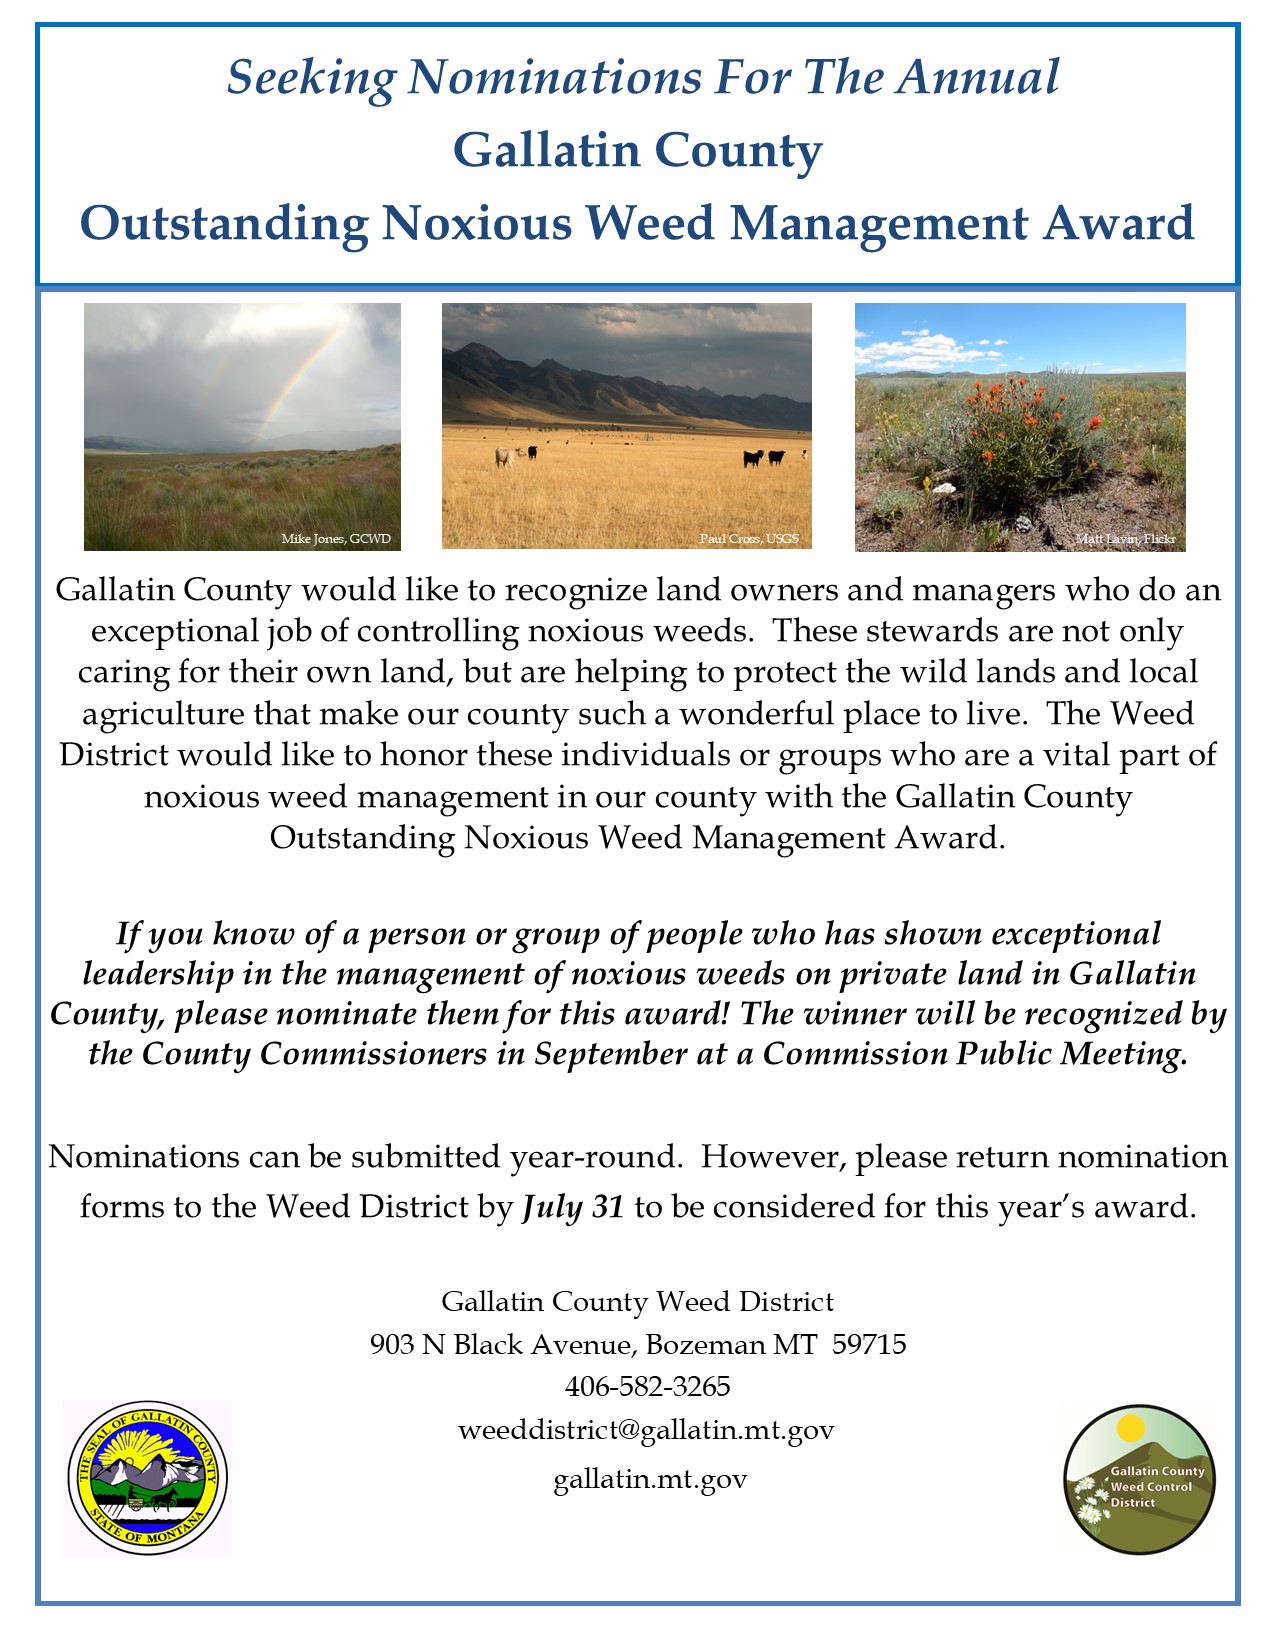 Award Flyer with information